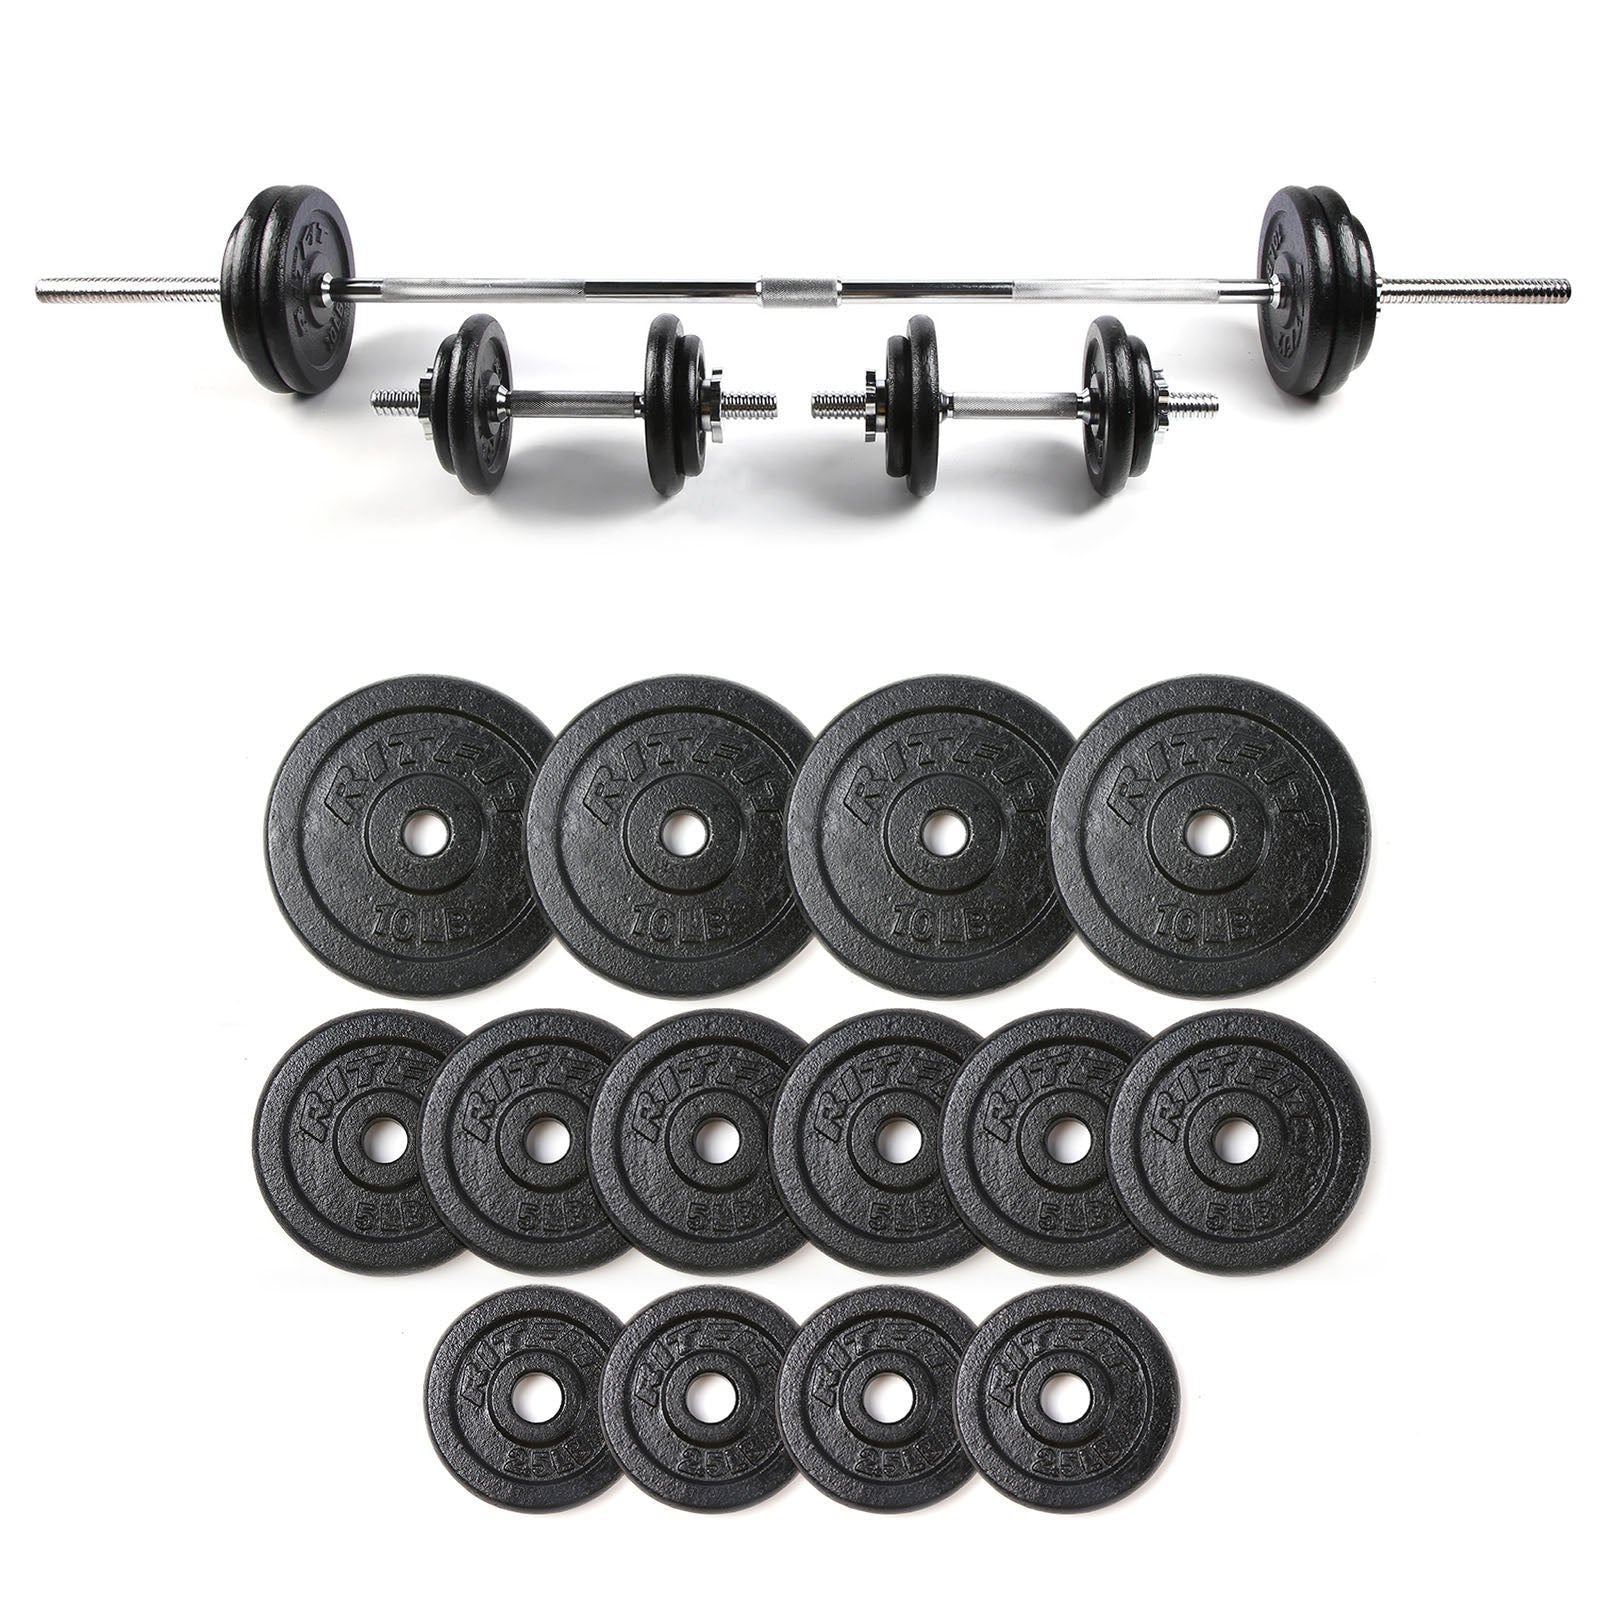 RitFit Cast Iron Adjustable Dumbbells 100 LBS Set with Connector